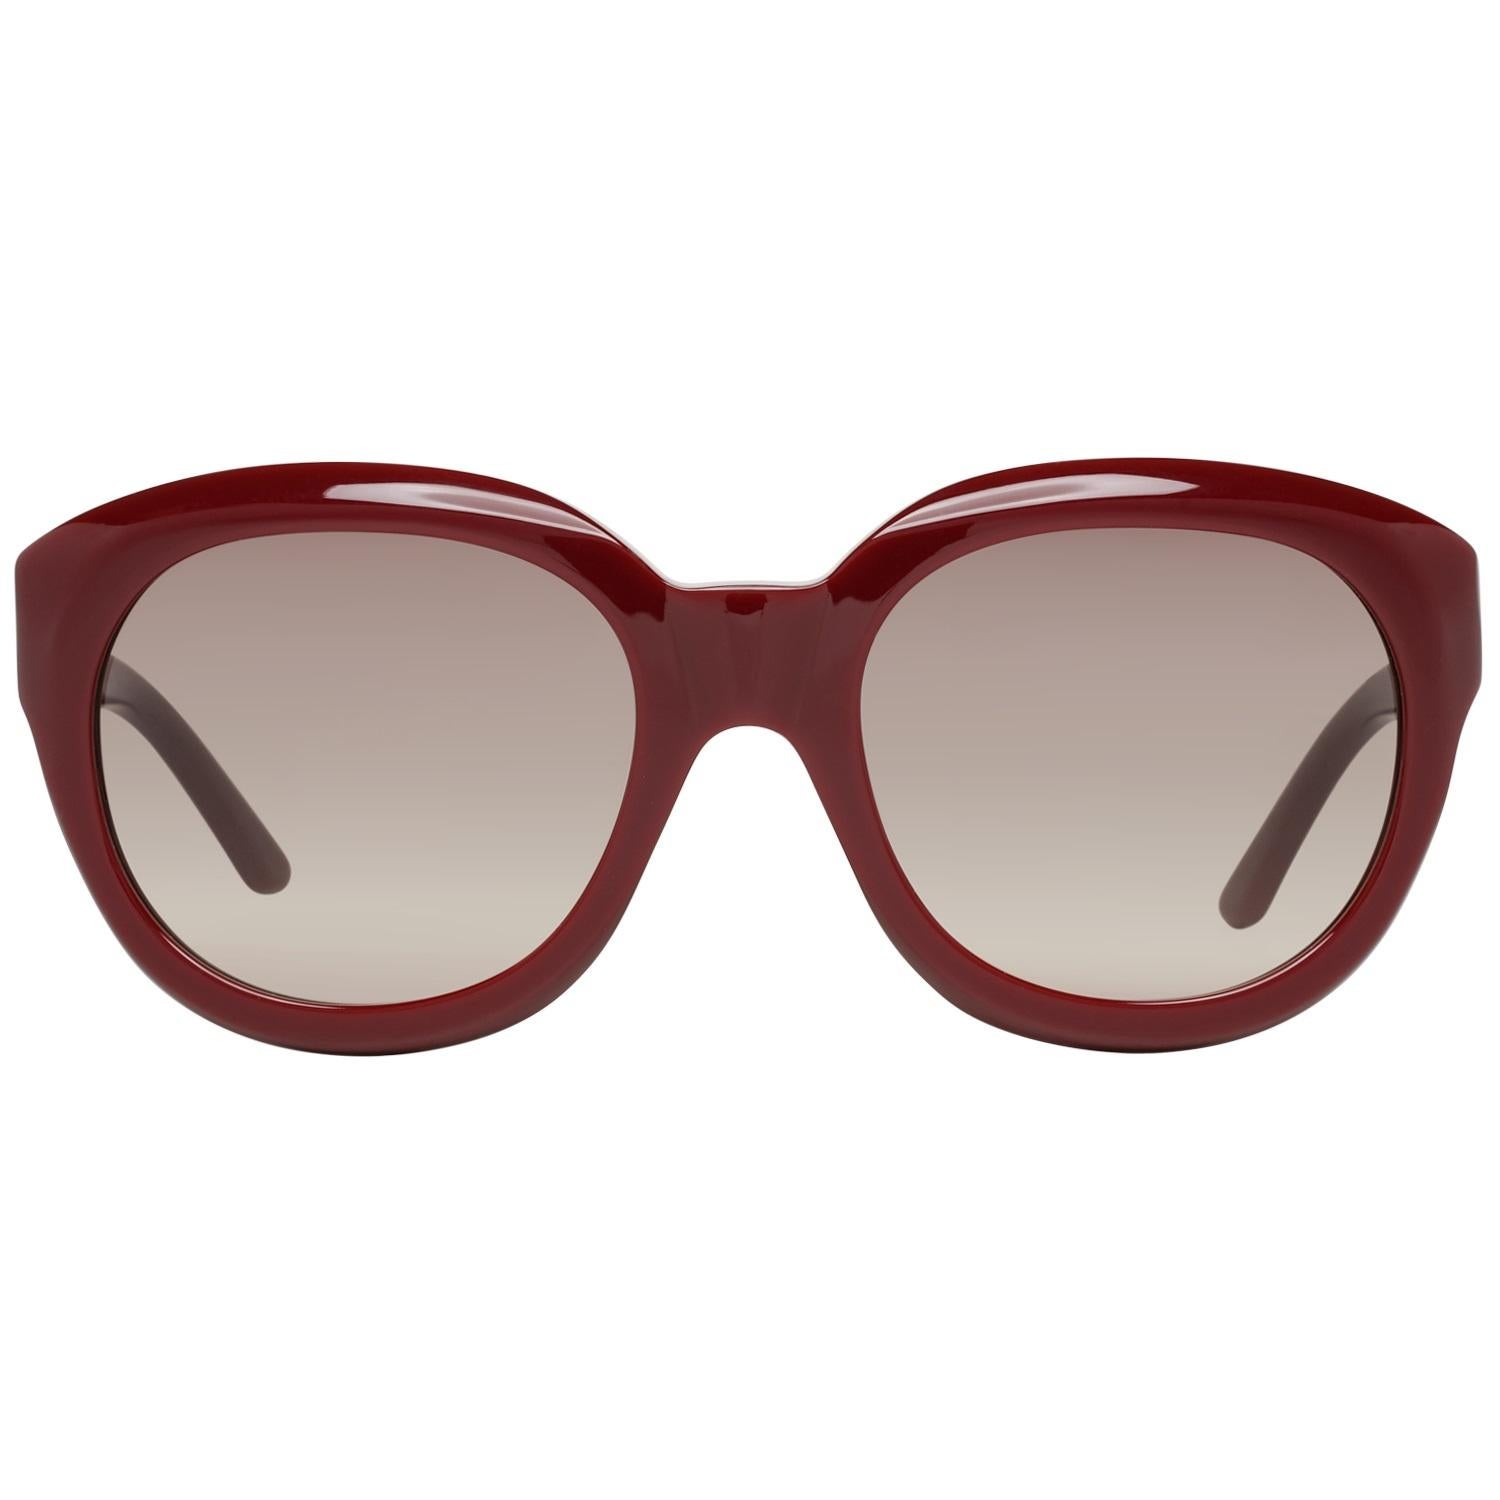 Details

MATERIAL: Acetate

COLOR: Burgundy

MODEL: CL40071I 5669F

GENDER: Women

COUNTRY OF MANUFACTURE: Italy

TYPE: Sunglasses

ORIGINAL CASE?: Yes

STYLE: Round

OCCASION: Casual

FEATURES: Lightweight

LENS COLOR: Grey

LENS TECHNOLOGY: No